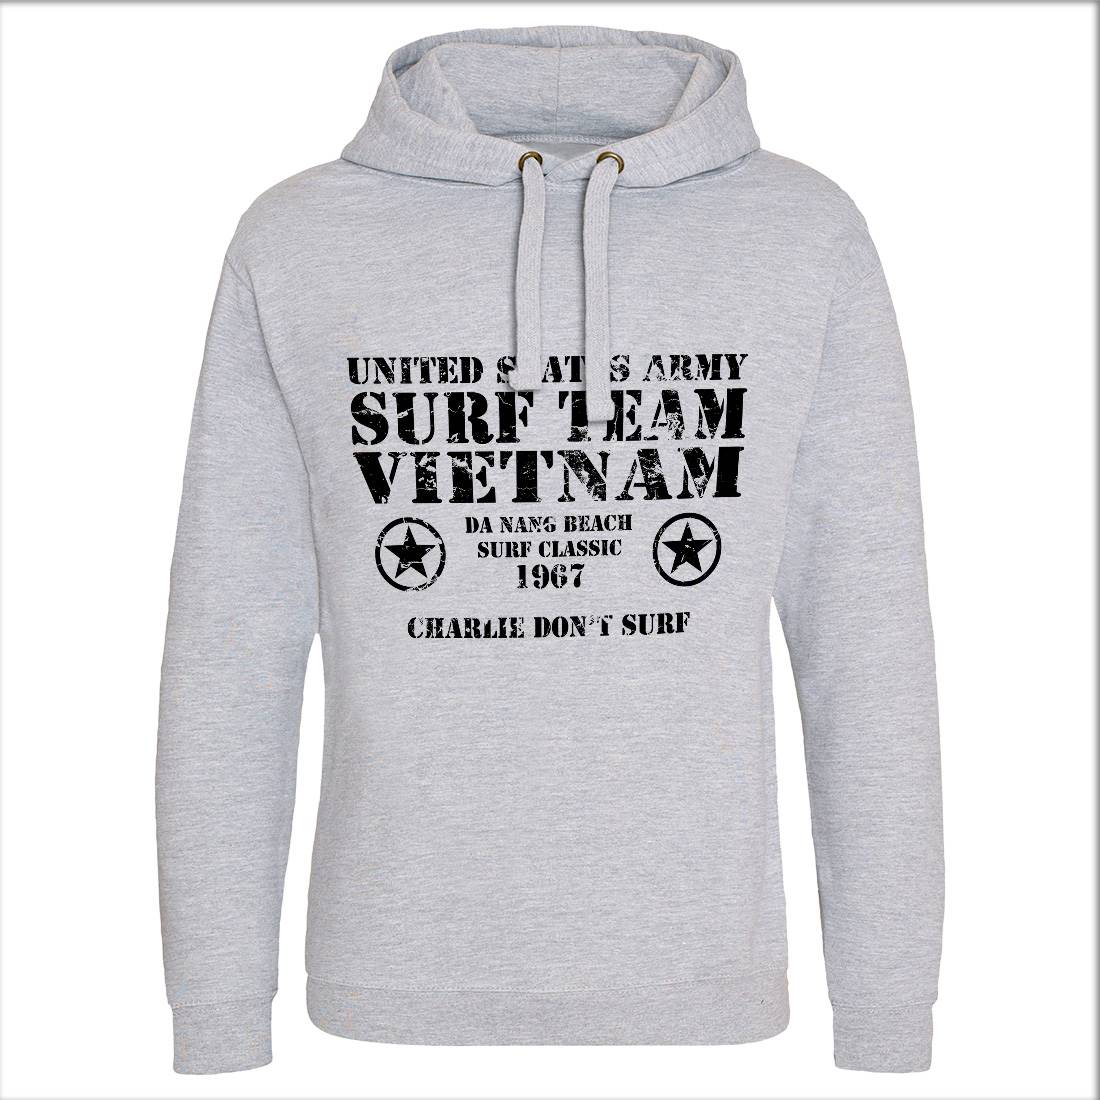 Surf Team Vietnam Mens Hoodie Without Pocket Army D438